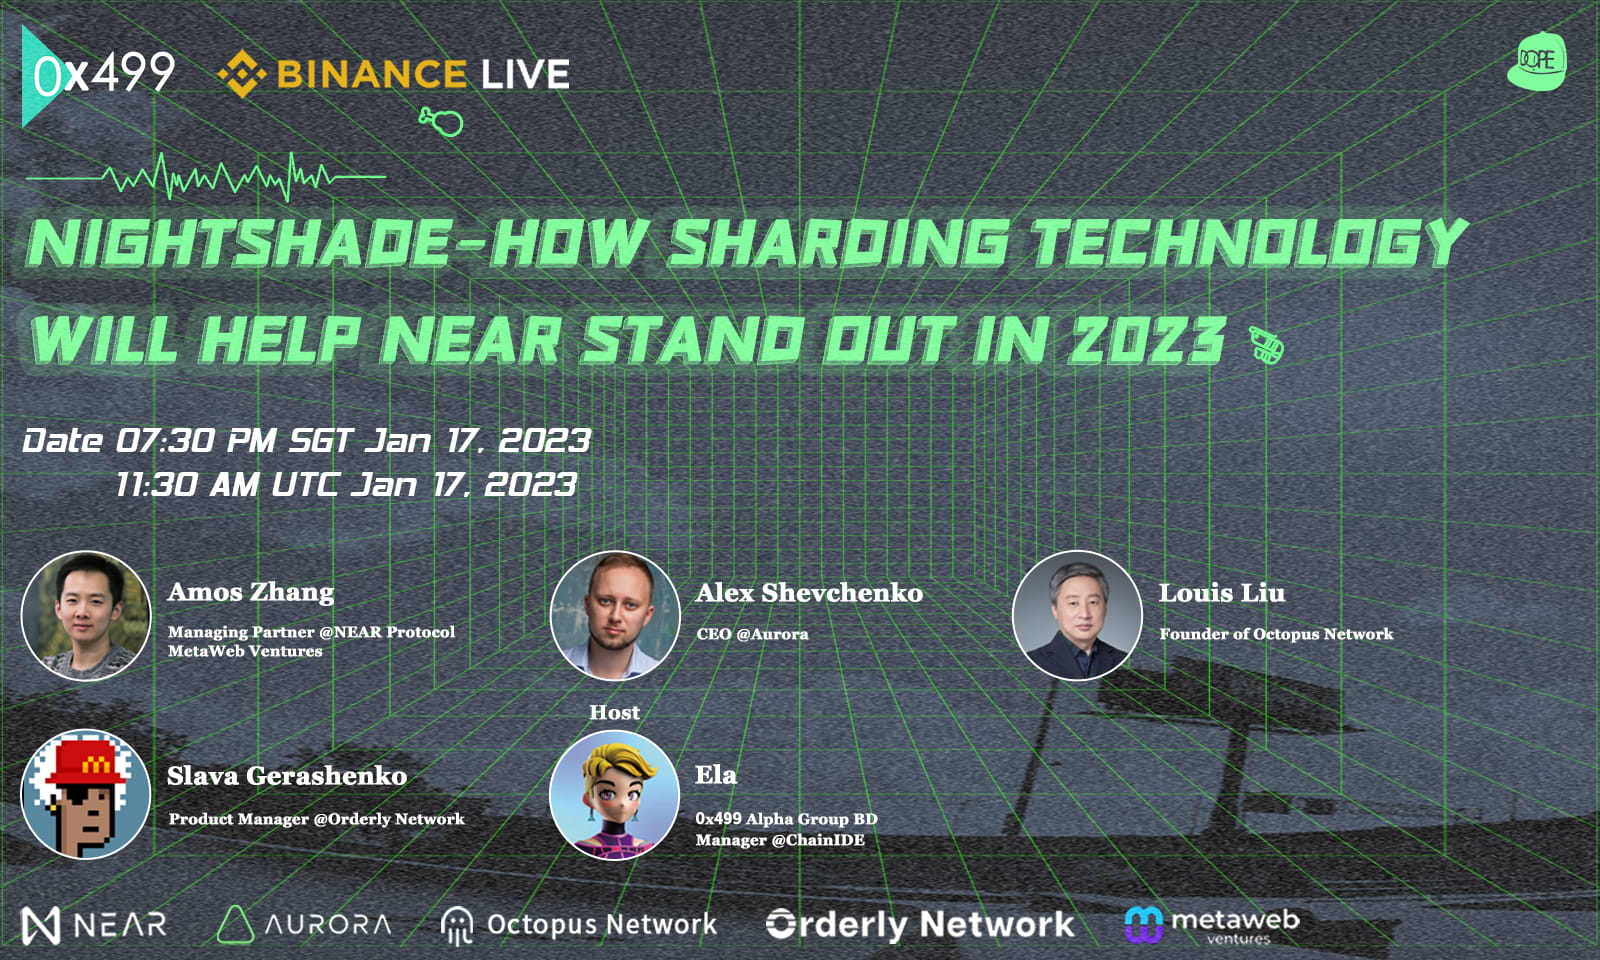 0x499: NightShade-Sharding Technology Will Help Near Stand Out In 2023